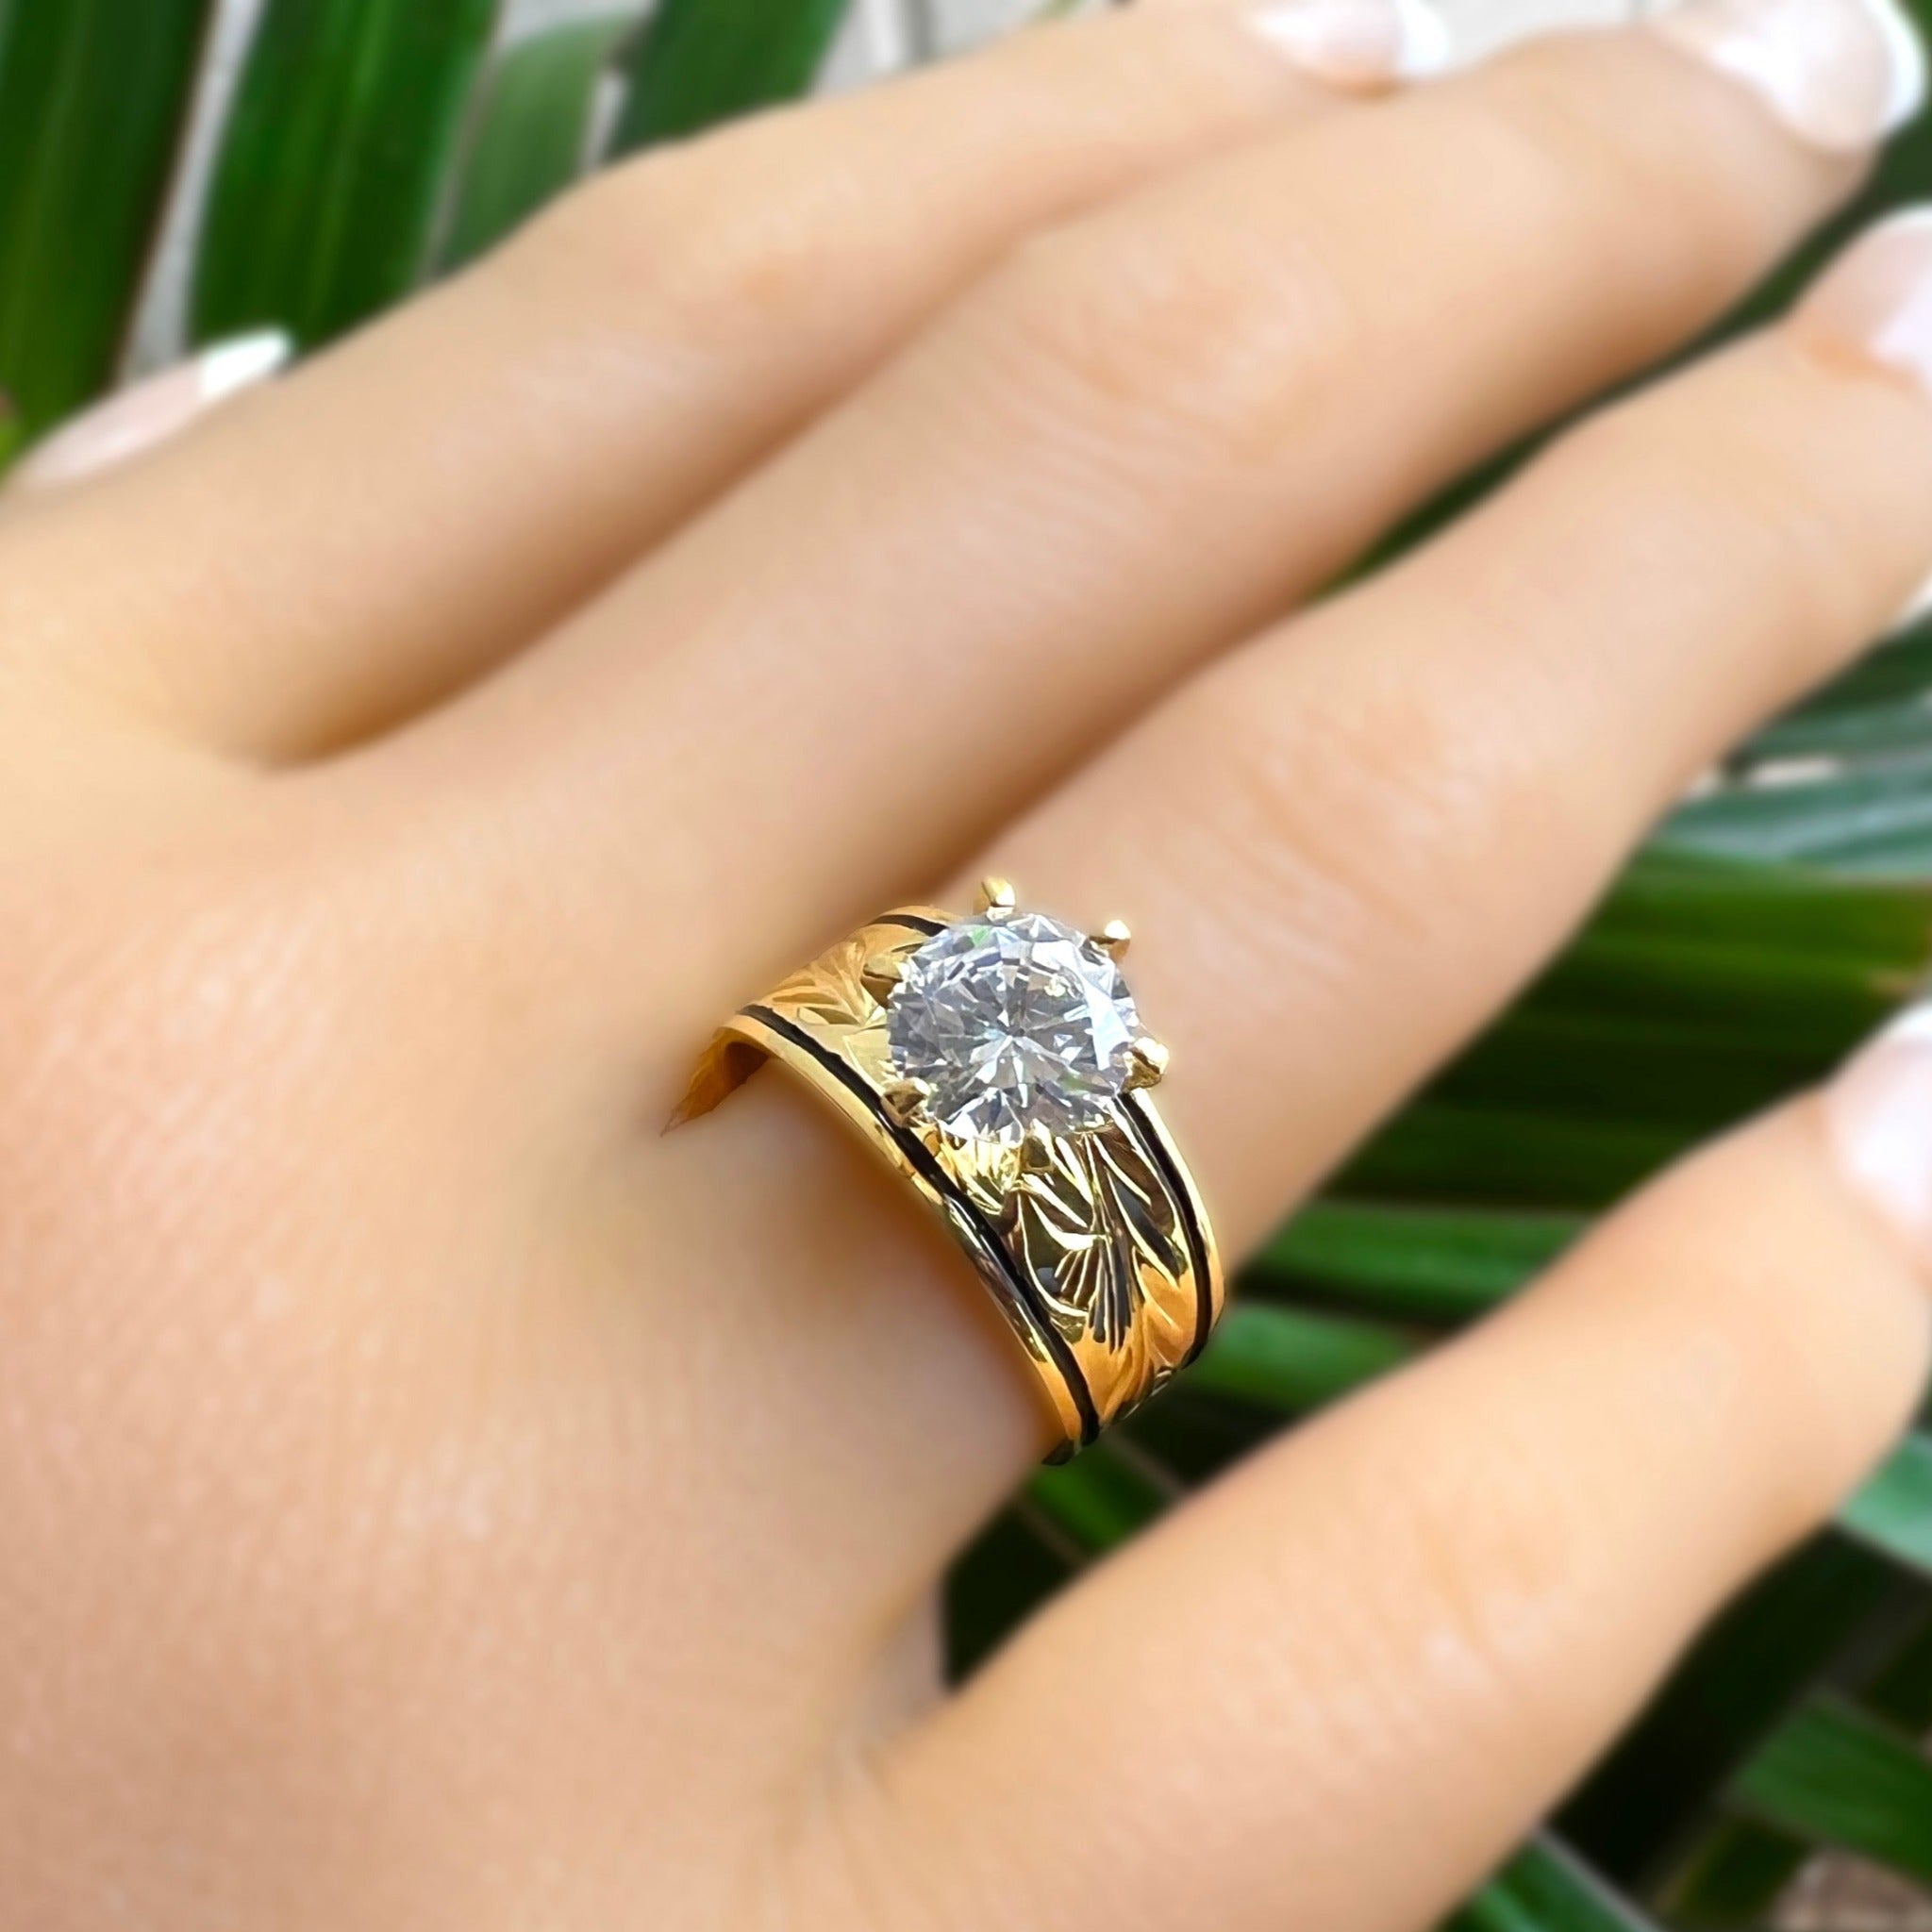 Hawaiian Scroll Gold Plated Solitaire CZ Ring is as Real As it Gets